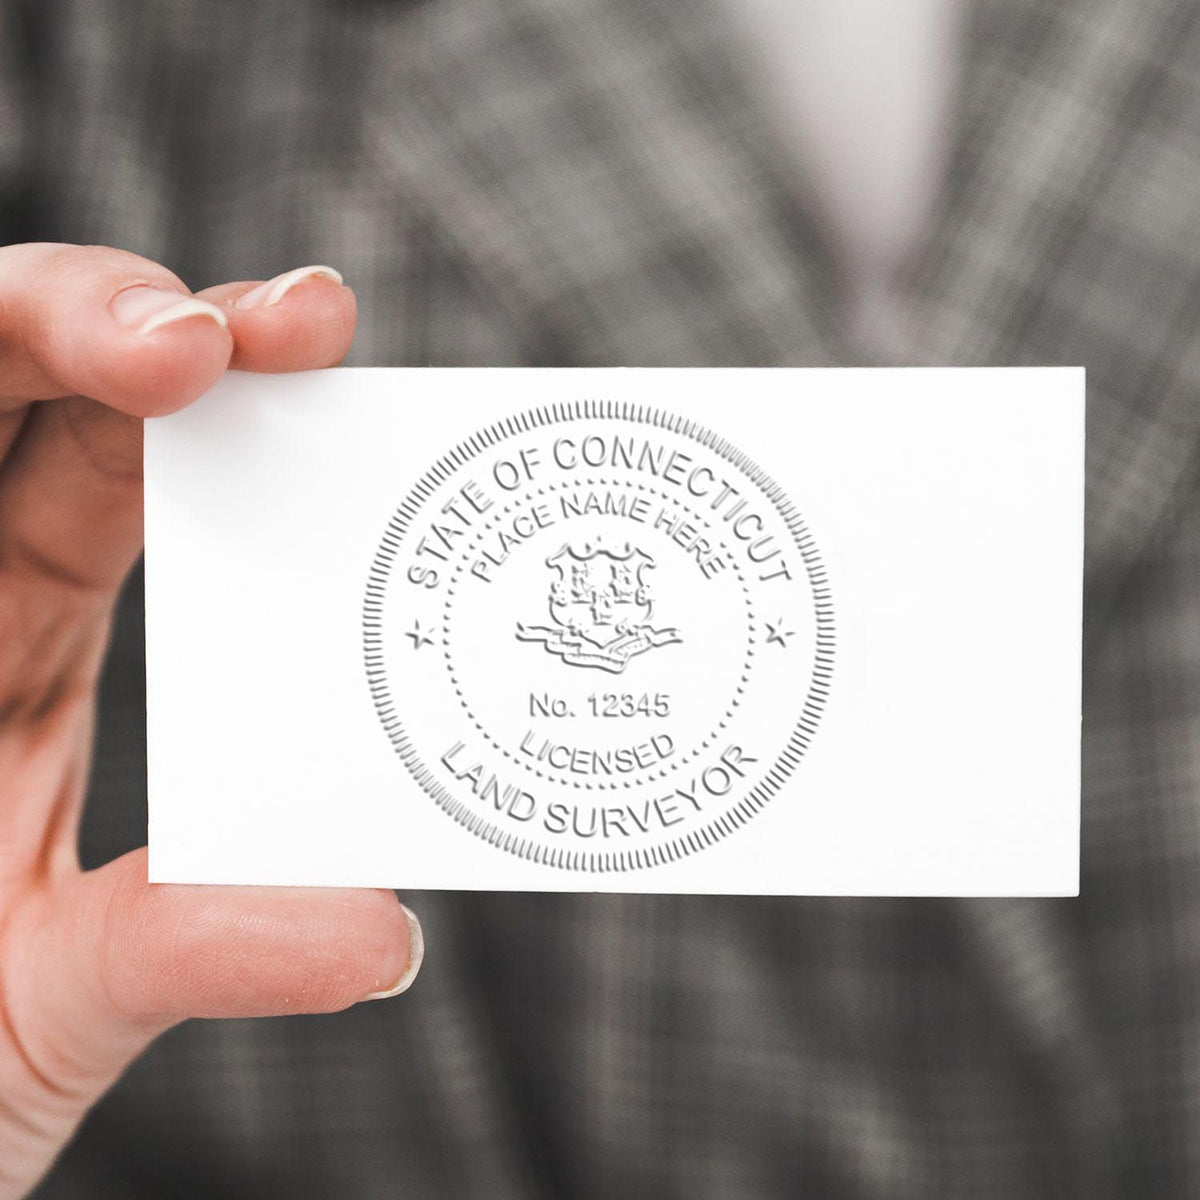 An alternative view of the Hybrid Connecticut Land Surveyor Seal stamped on a sheet of paper showing the image in use